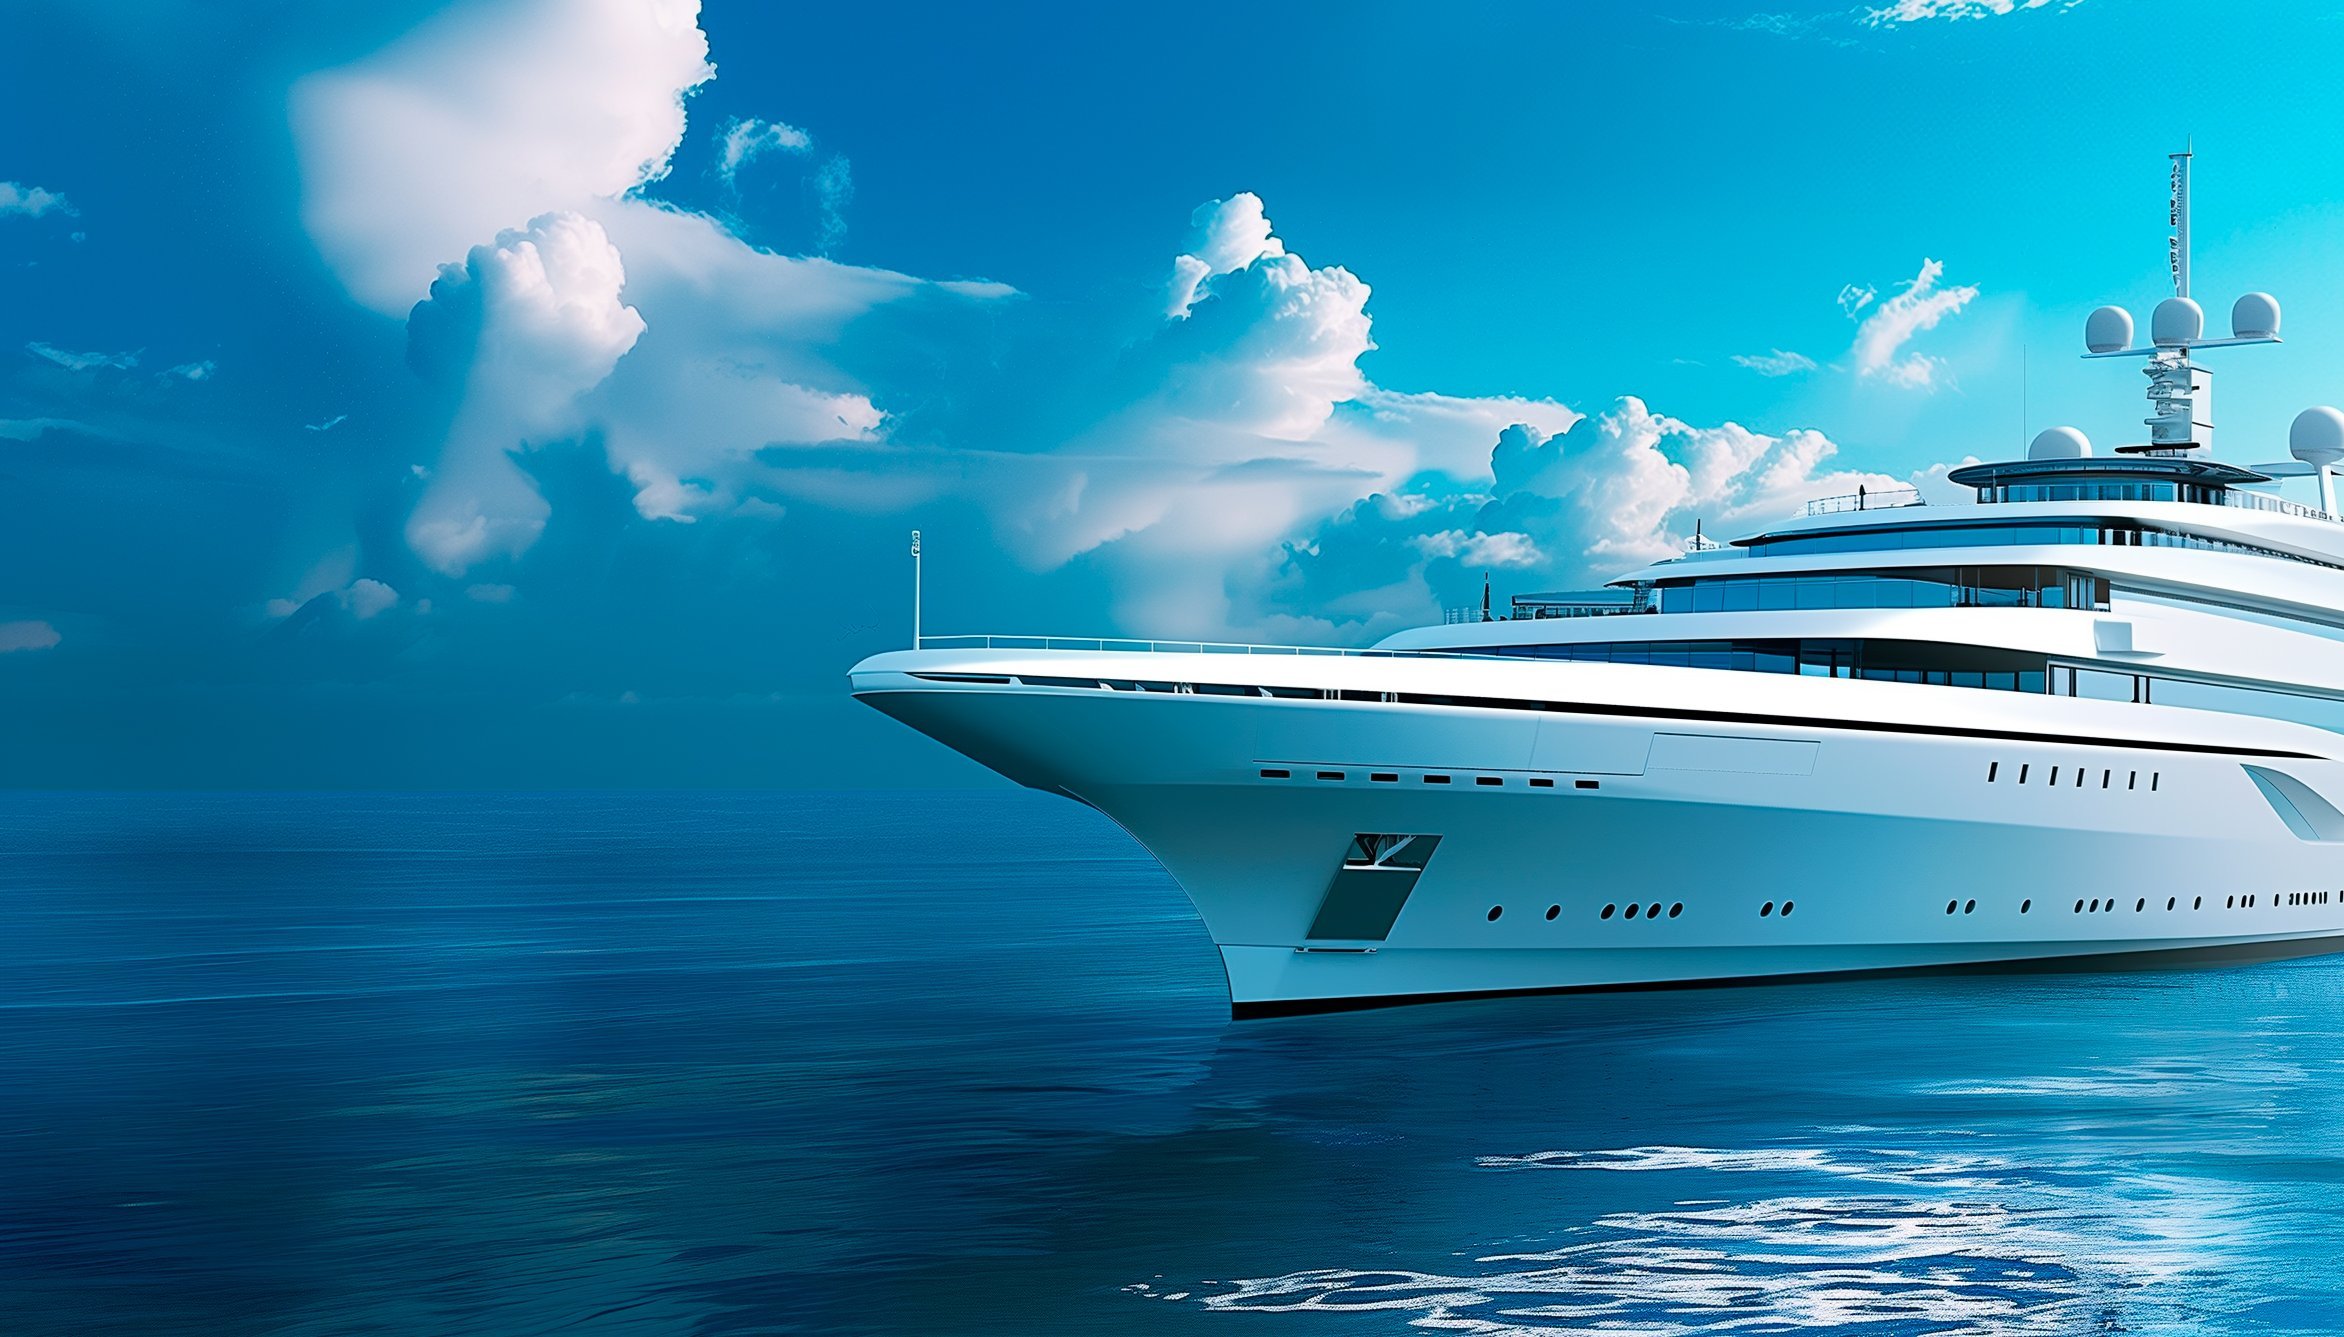 The image shows a Megayacht on a deep blue ocean at a clear and sunny day